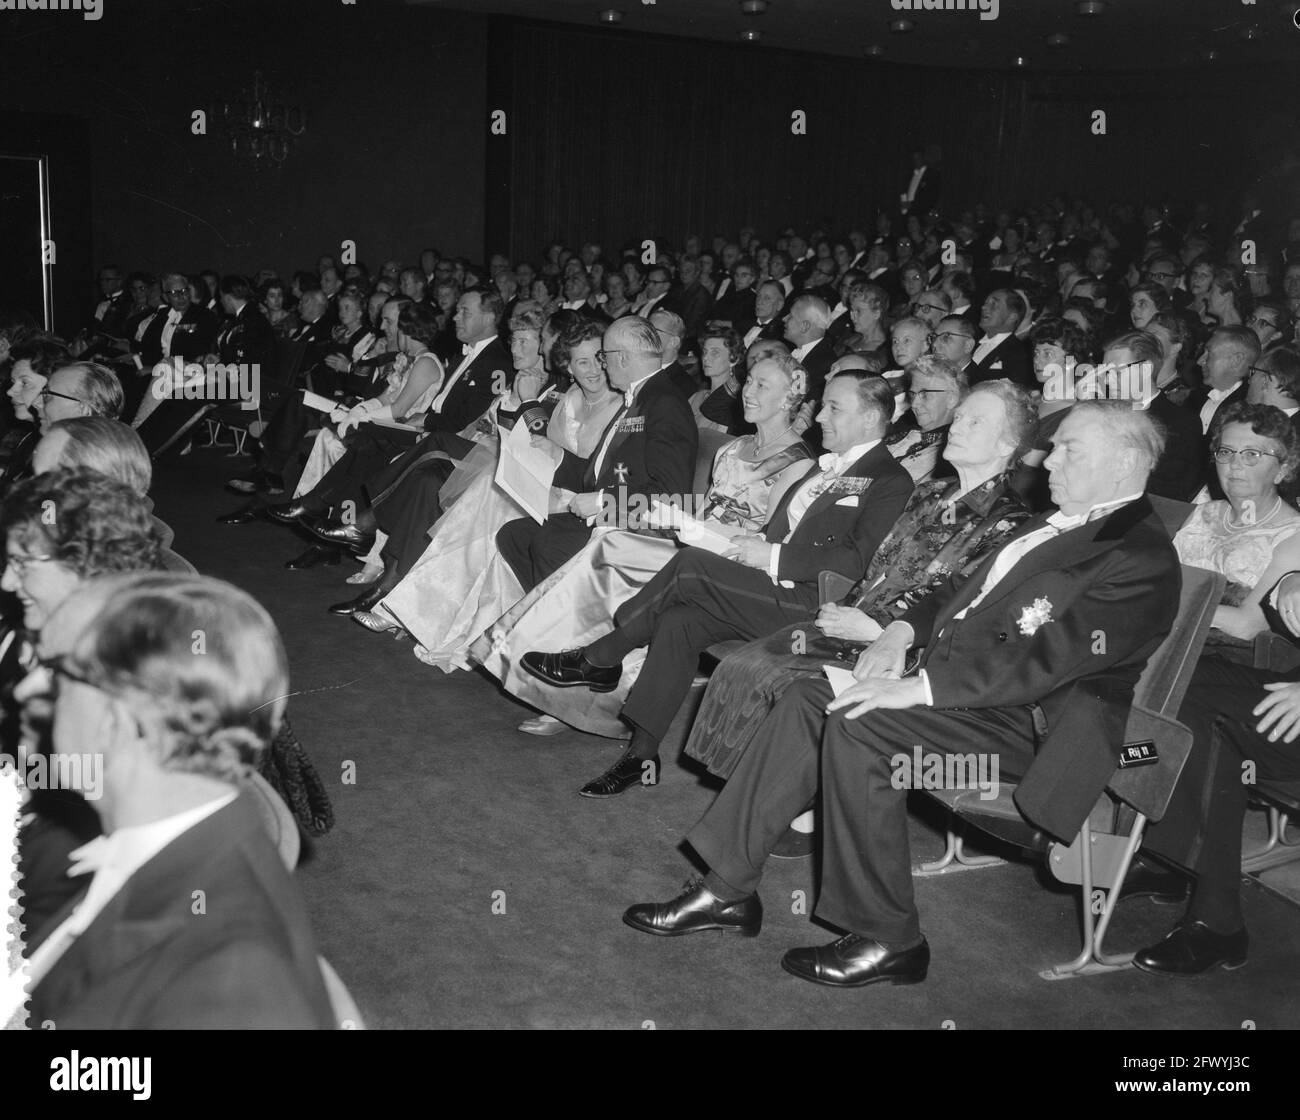 295th anniversary of the Marine Corps at the Rotterdam Theatre, 1 December 1960, theaters, The Netherlands, 20th century press agency photo, news to remember, documentary, historic photography 1945-1990, visual stories, human history of the Twentieth Century, capturing moments in time Stock Photo